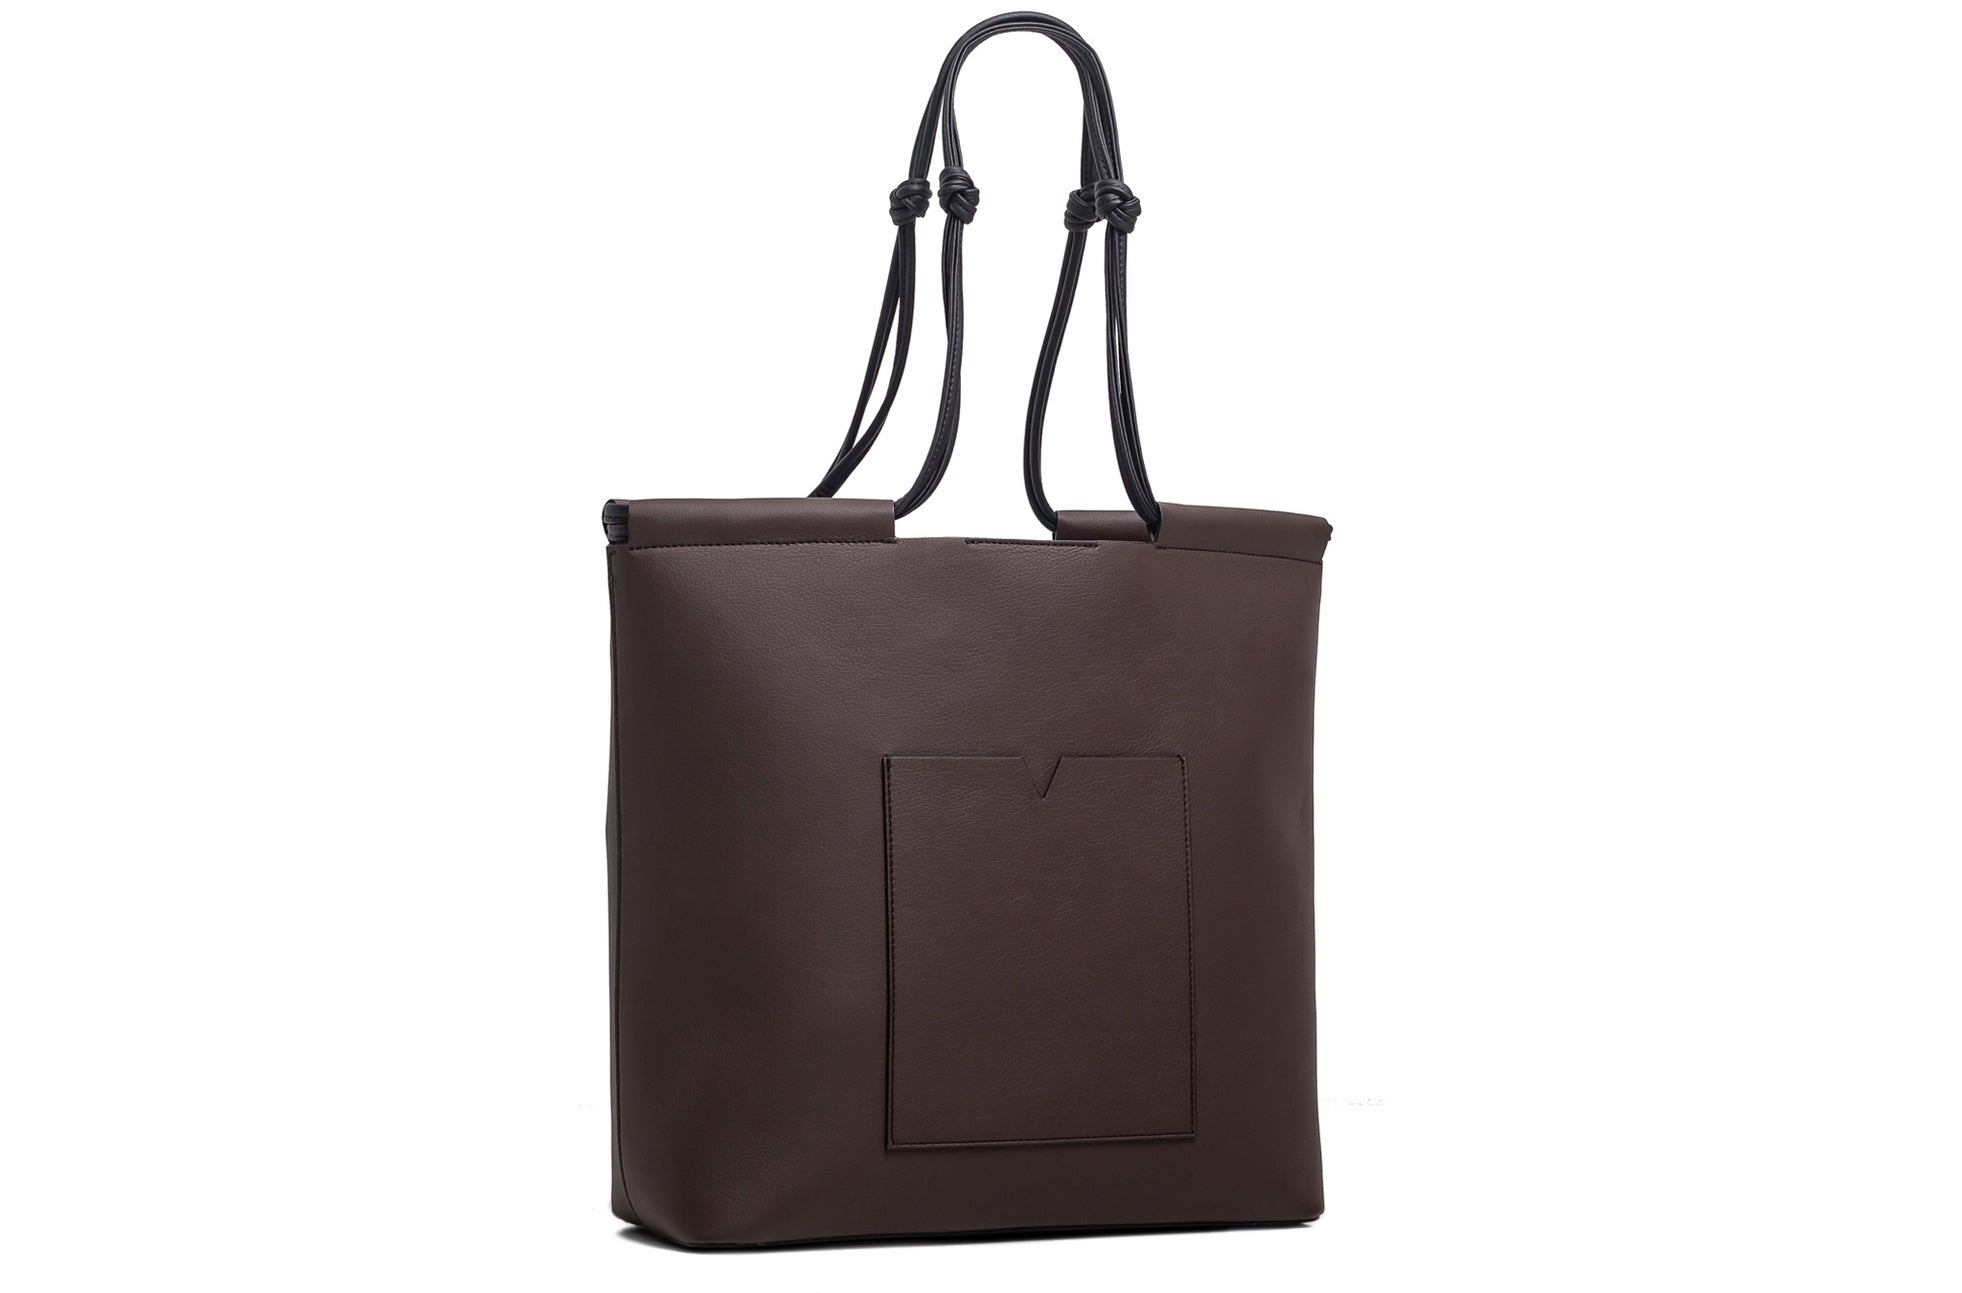 The Market Tote in Technik in Taupe and Black image 3